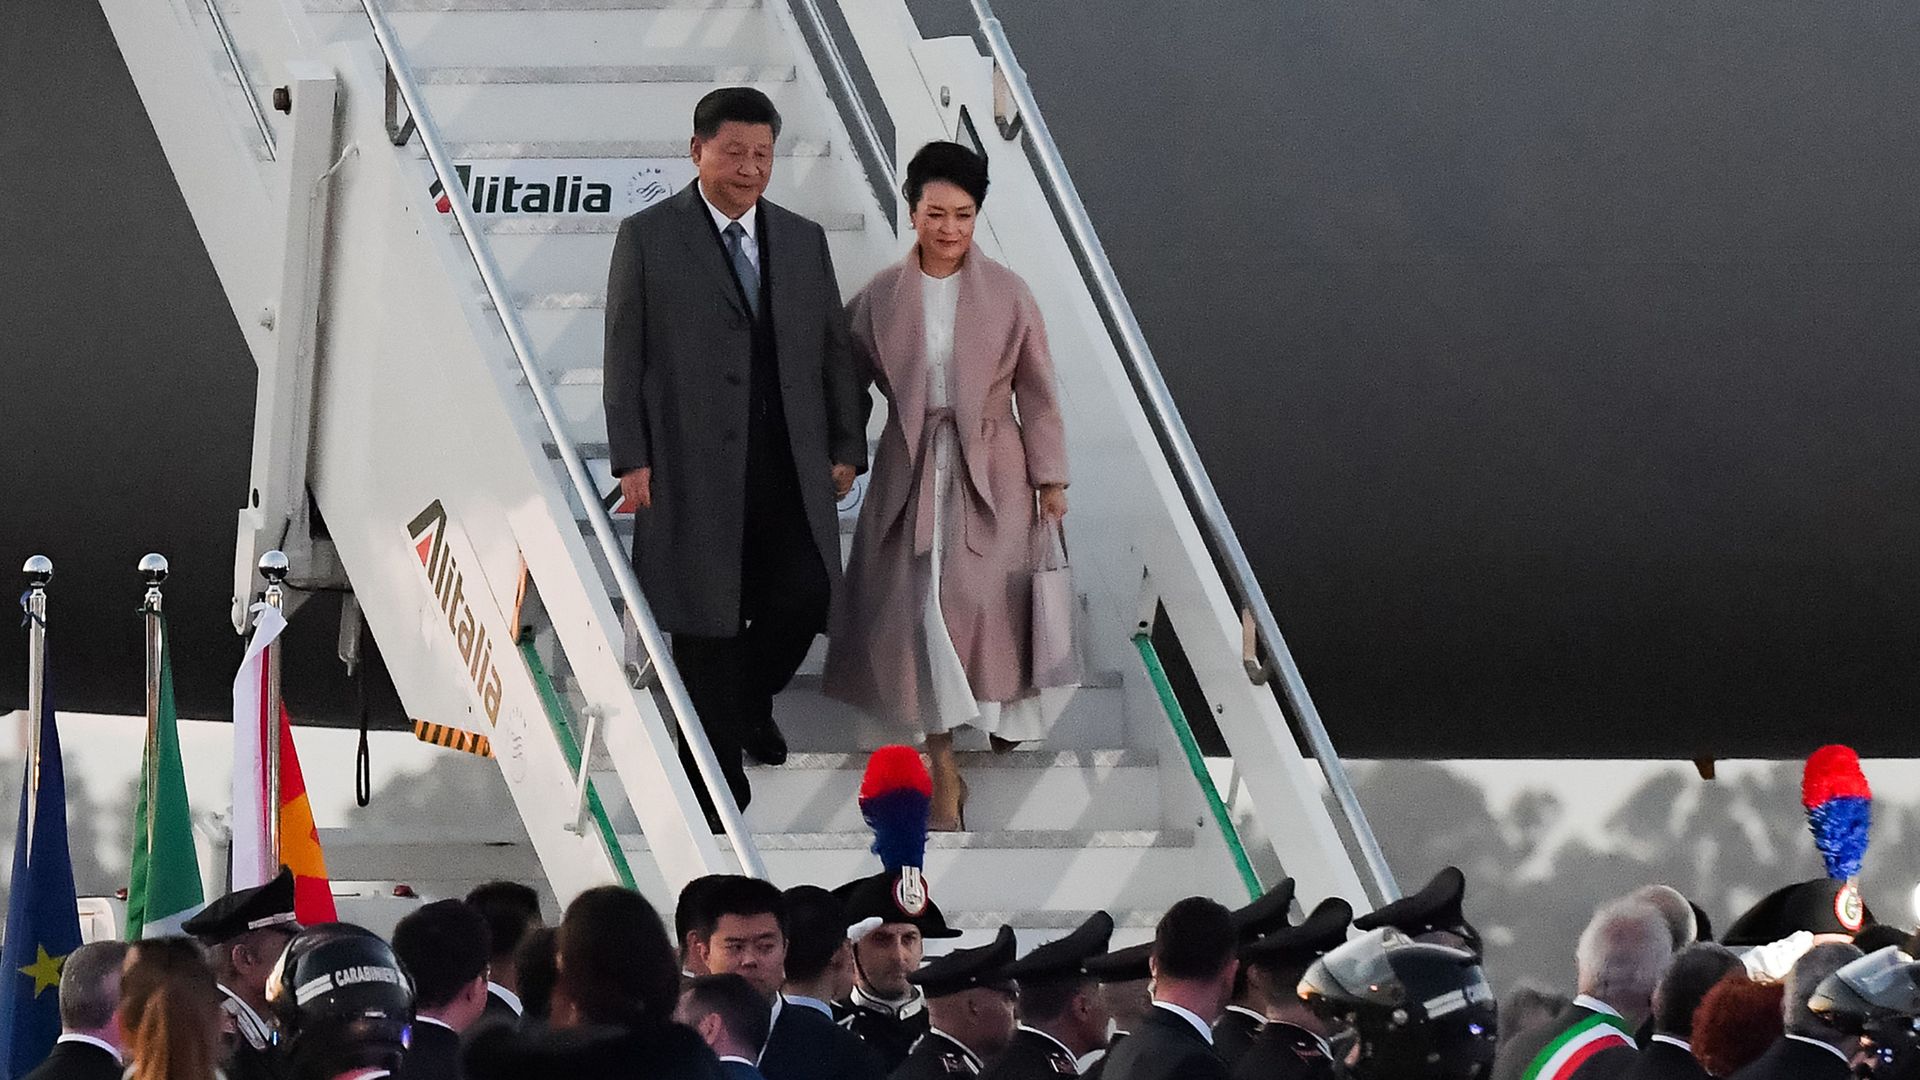 Xi Jinping and his wife deboarding their flight in Italy